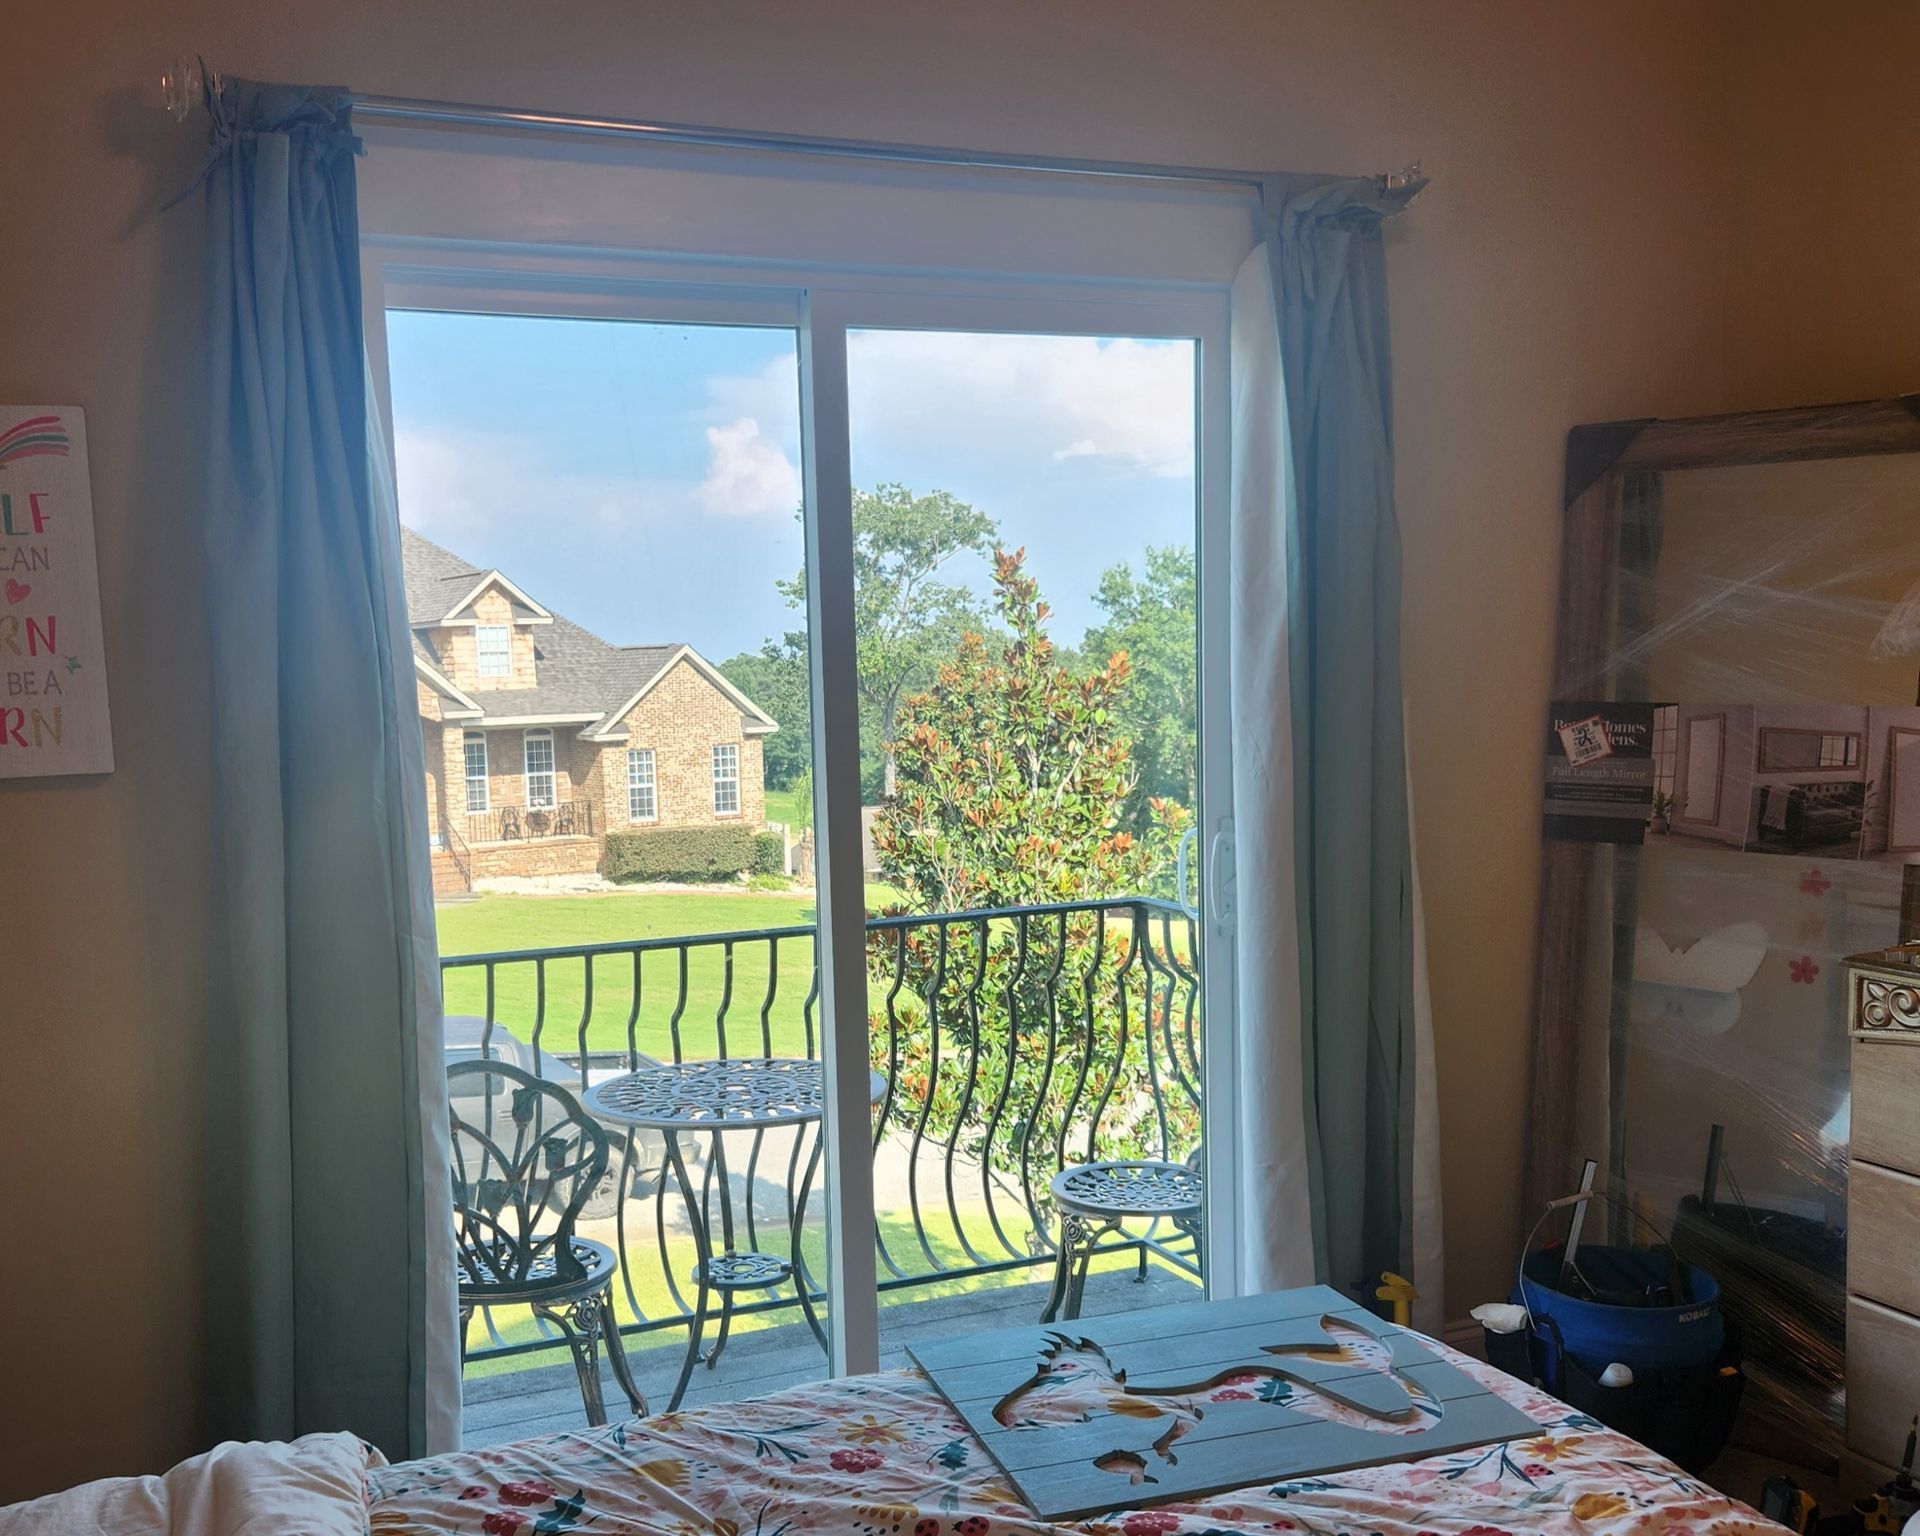 Cutting bright Sun & adding one-way privacy to bedroom glass doors were of top priorities solved by SPF Tint in Millbrook AL.